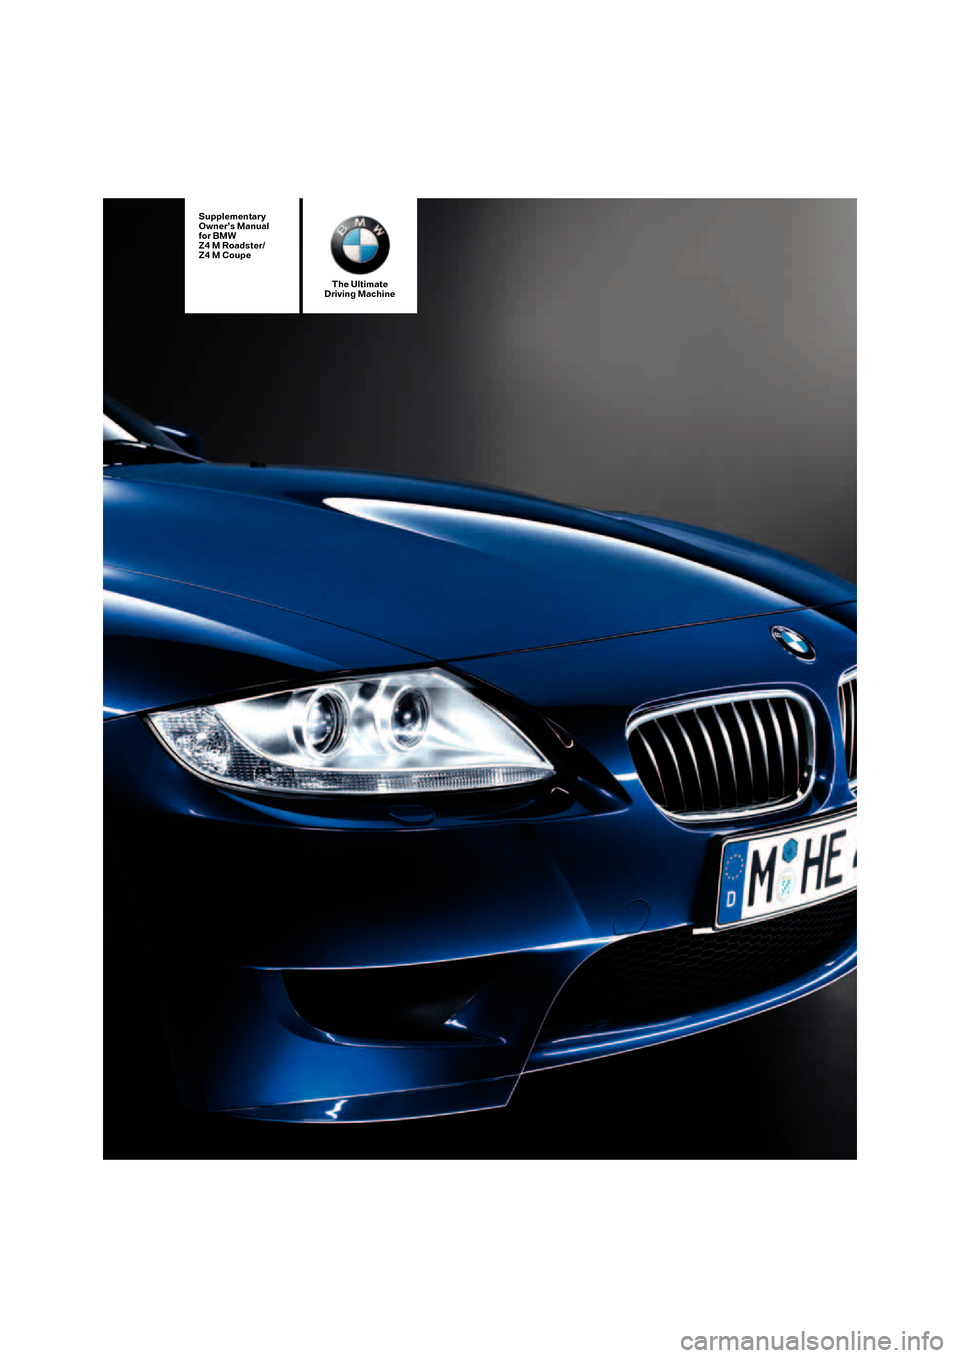 BMW Z4M COUPE 2006 E86 Owners Manual The Ultimate
Driving Machine
Supplementary
Owner’s Manual
for BMW
Z4 M Roadster/
Z4 M Coupe 